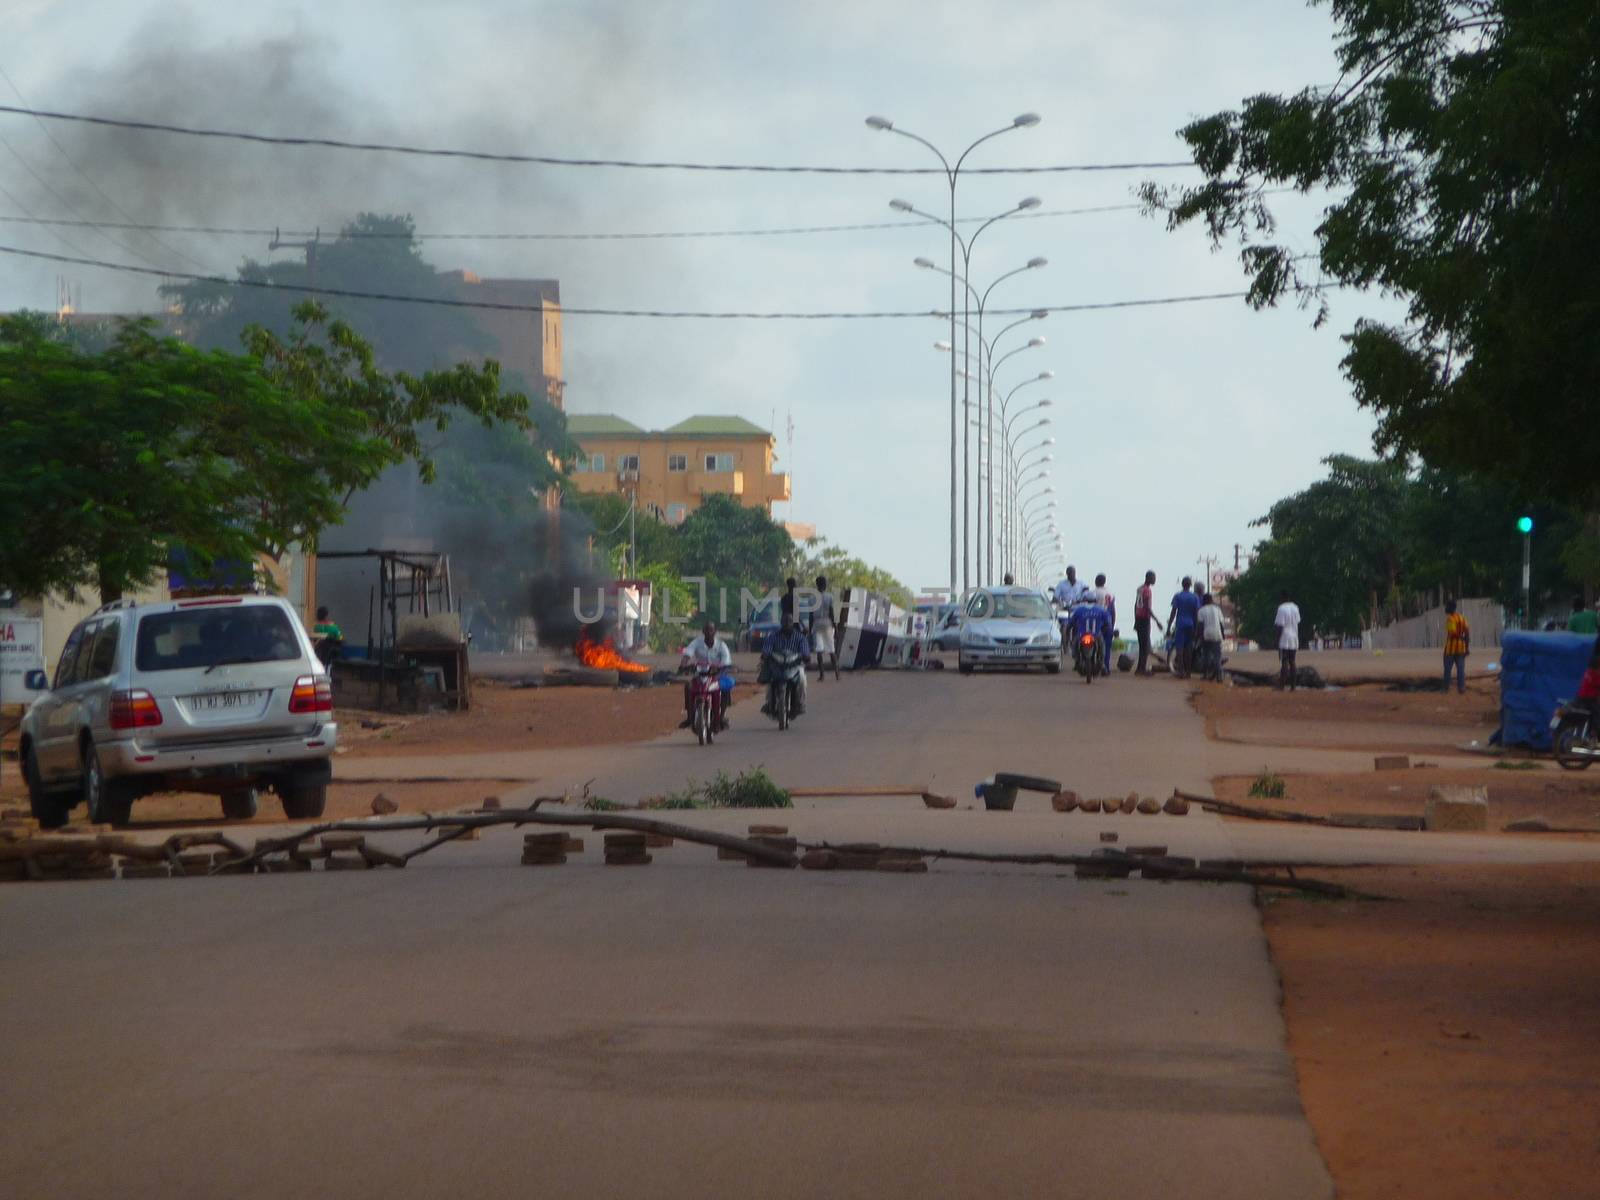 BURKINA FASO, Ouagadougou : Motorcycles are seen in front of barricades in Ouagadougou, Burkina Faso, on September 18, 2015. Protests have sparked in Ouagadougou after Presidential guard officers seized power in a coup.